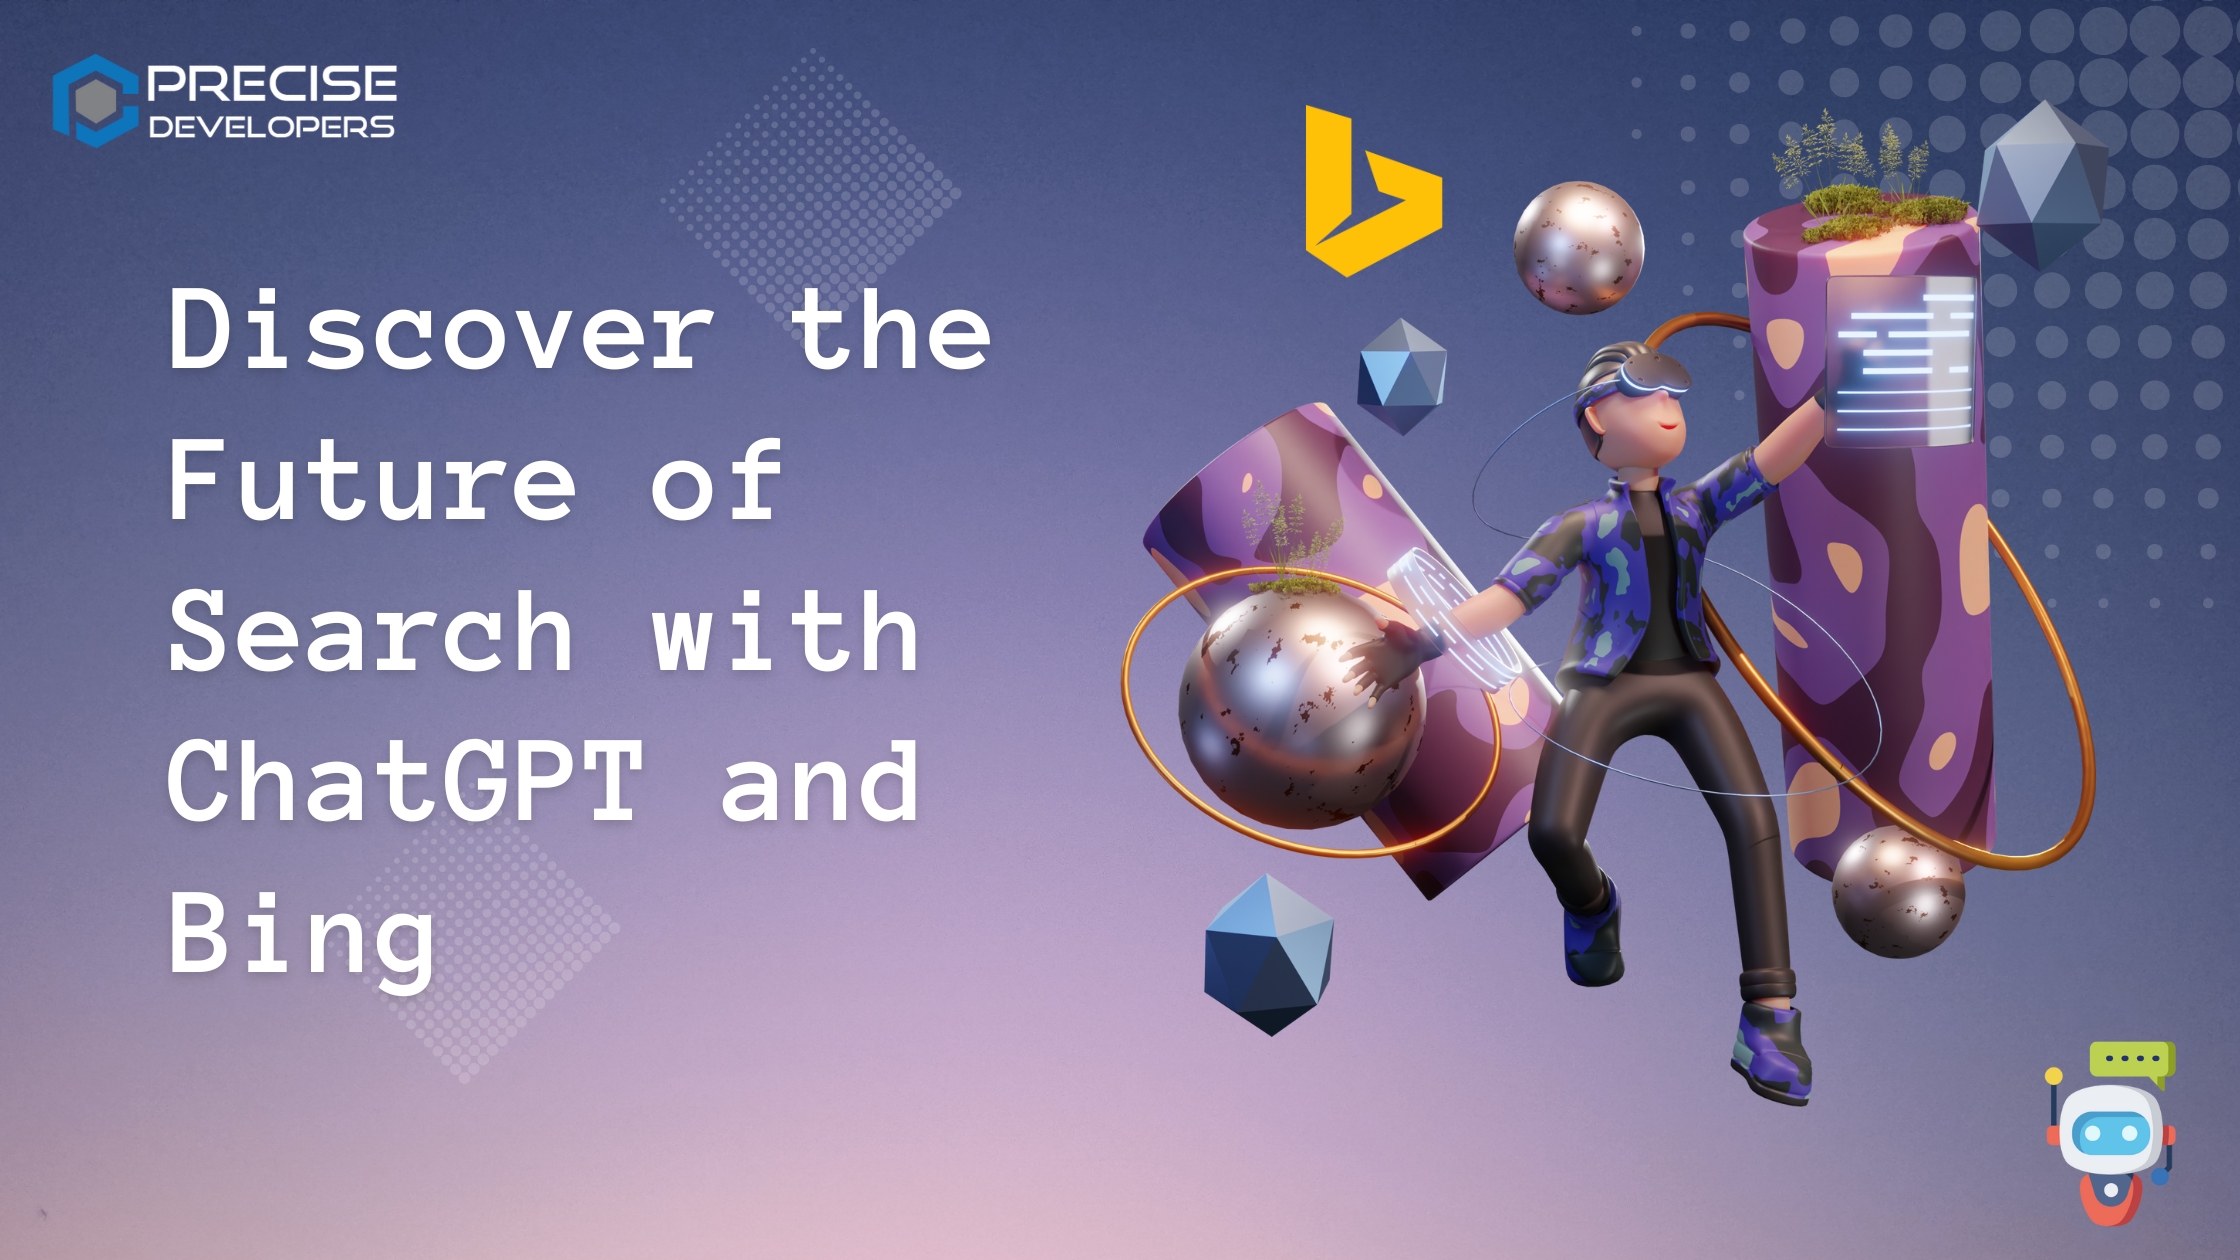 Discover the Future of Search with ChatGPT and Bing Precise Developers